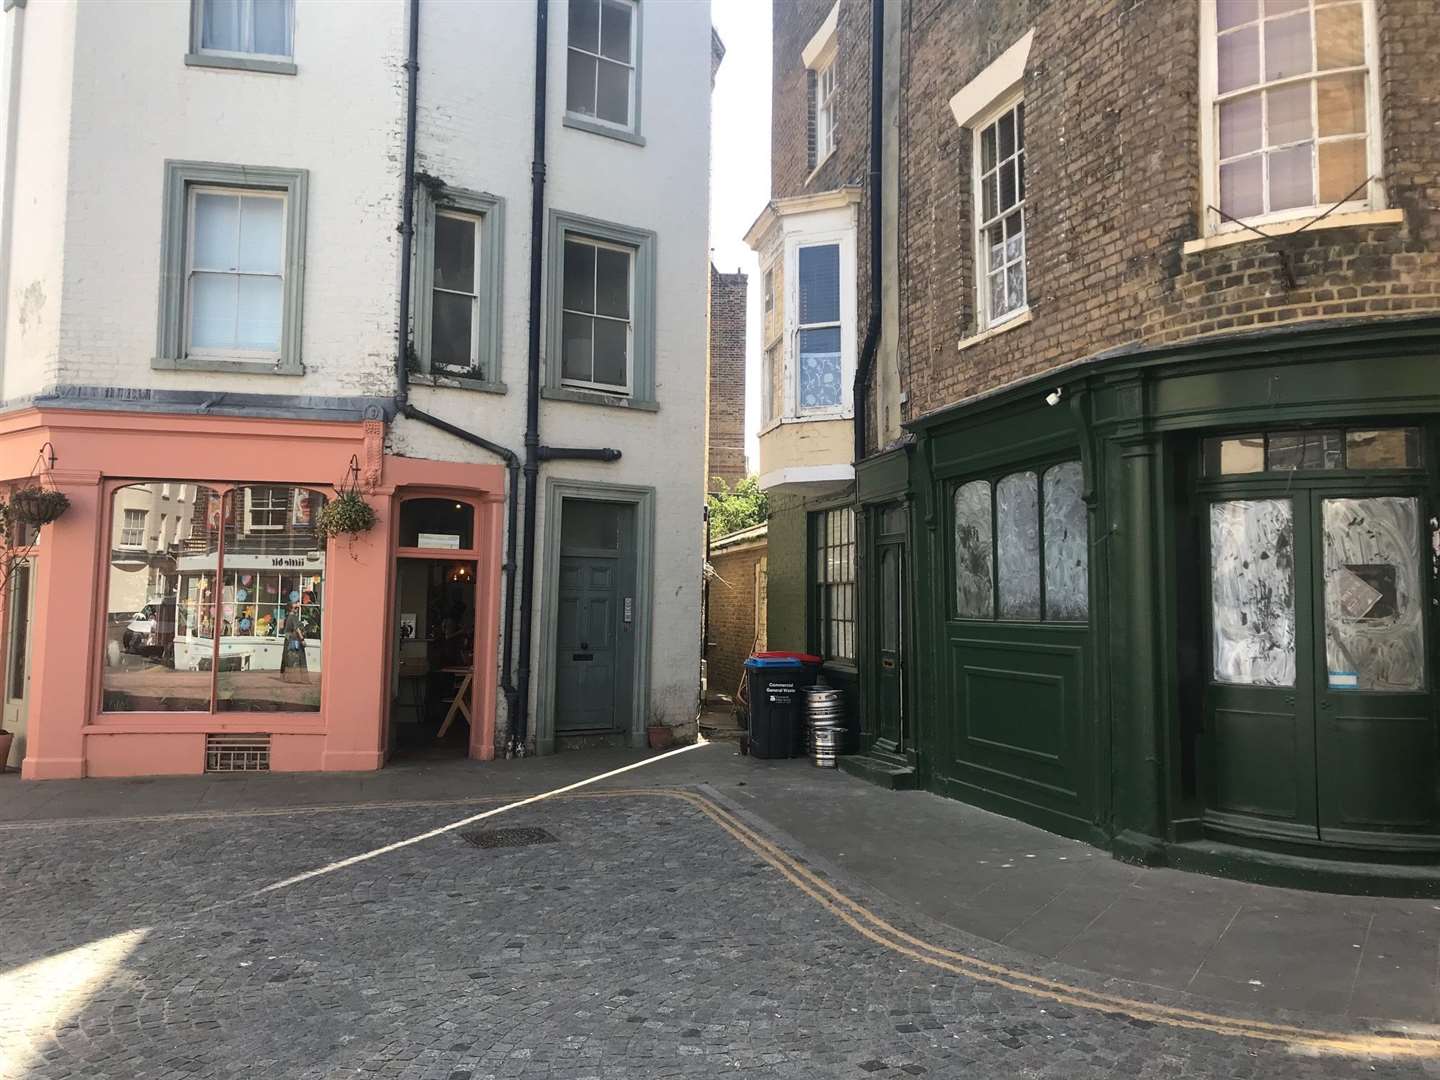 The Killing Eve location in Margate's Old Town, as it is today